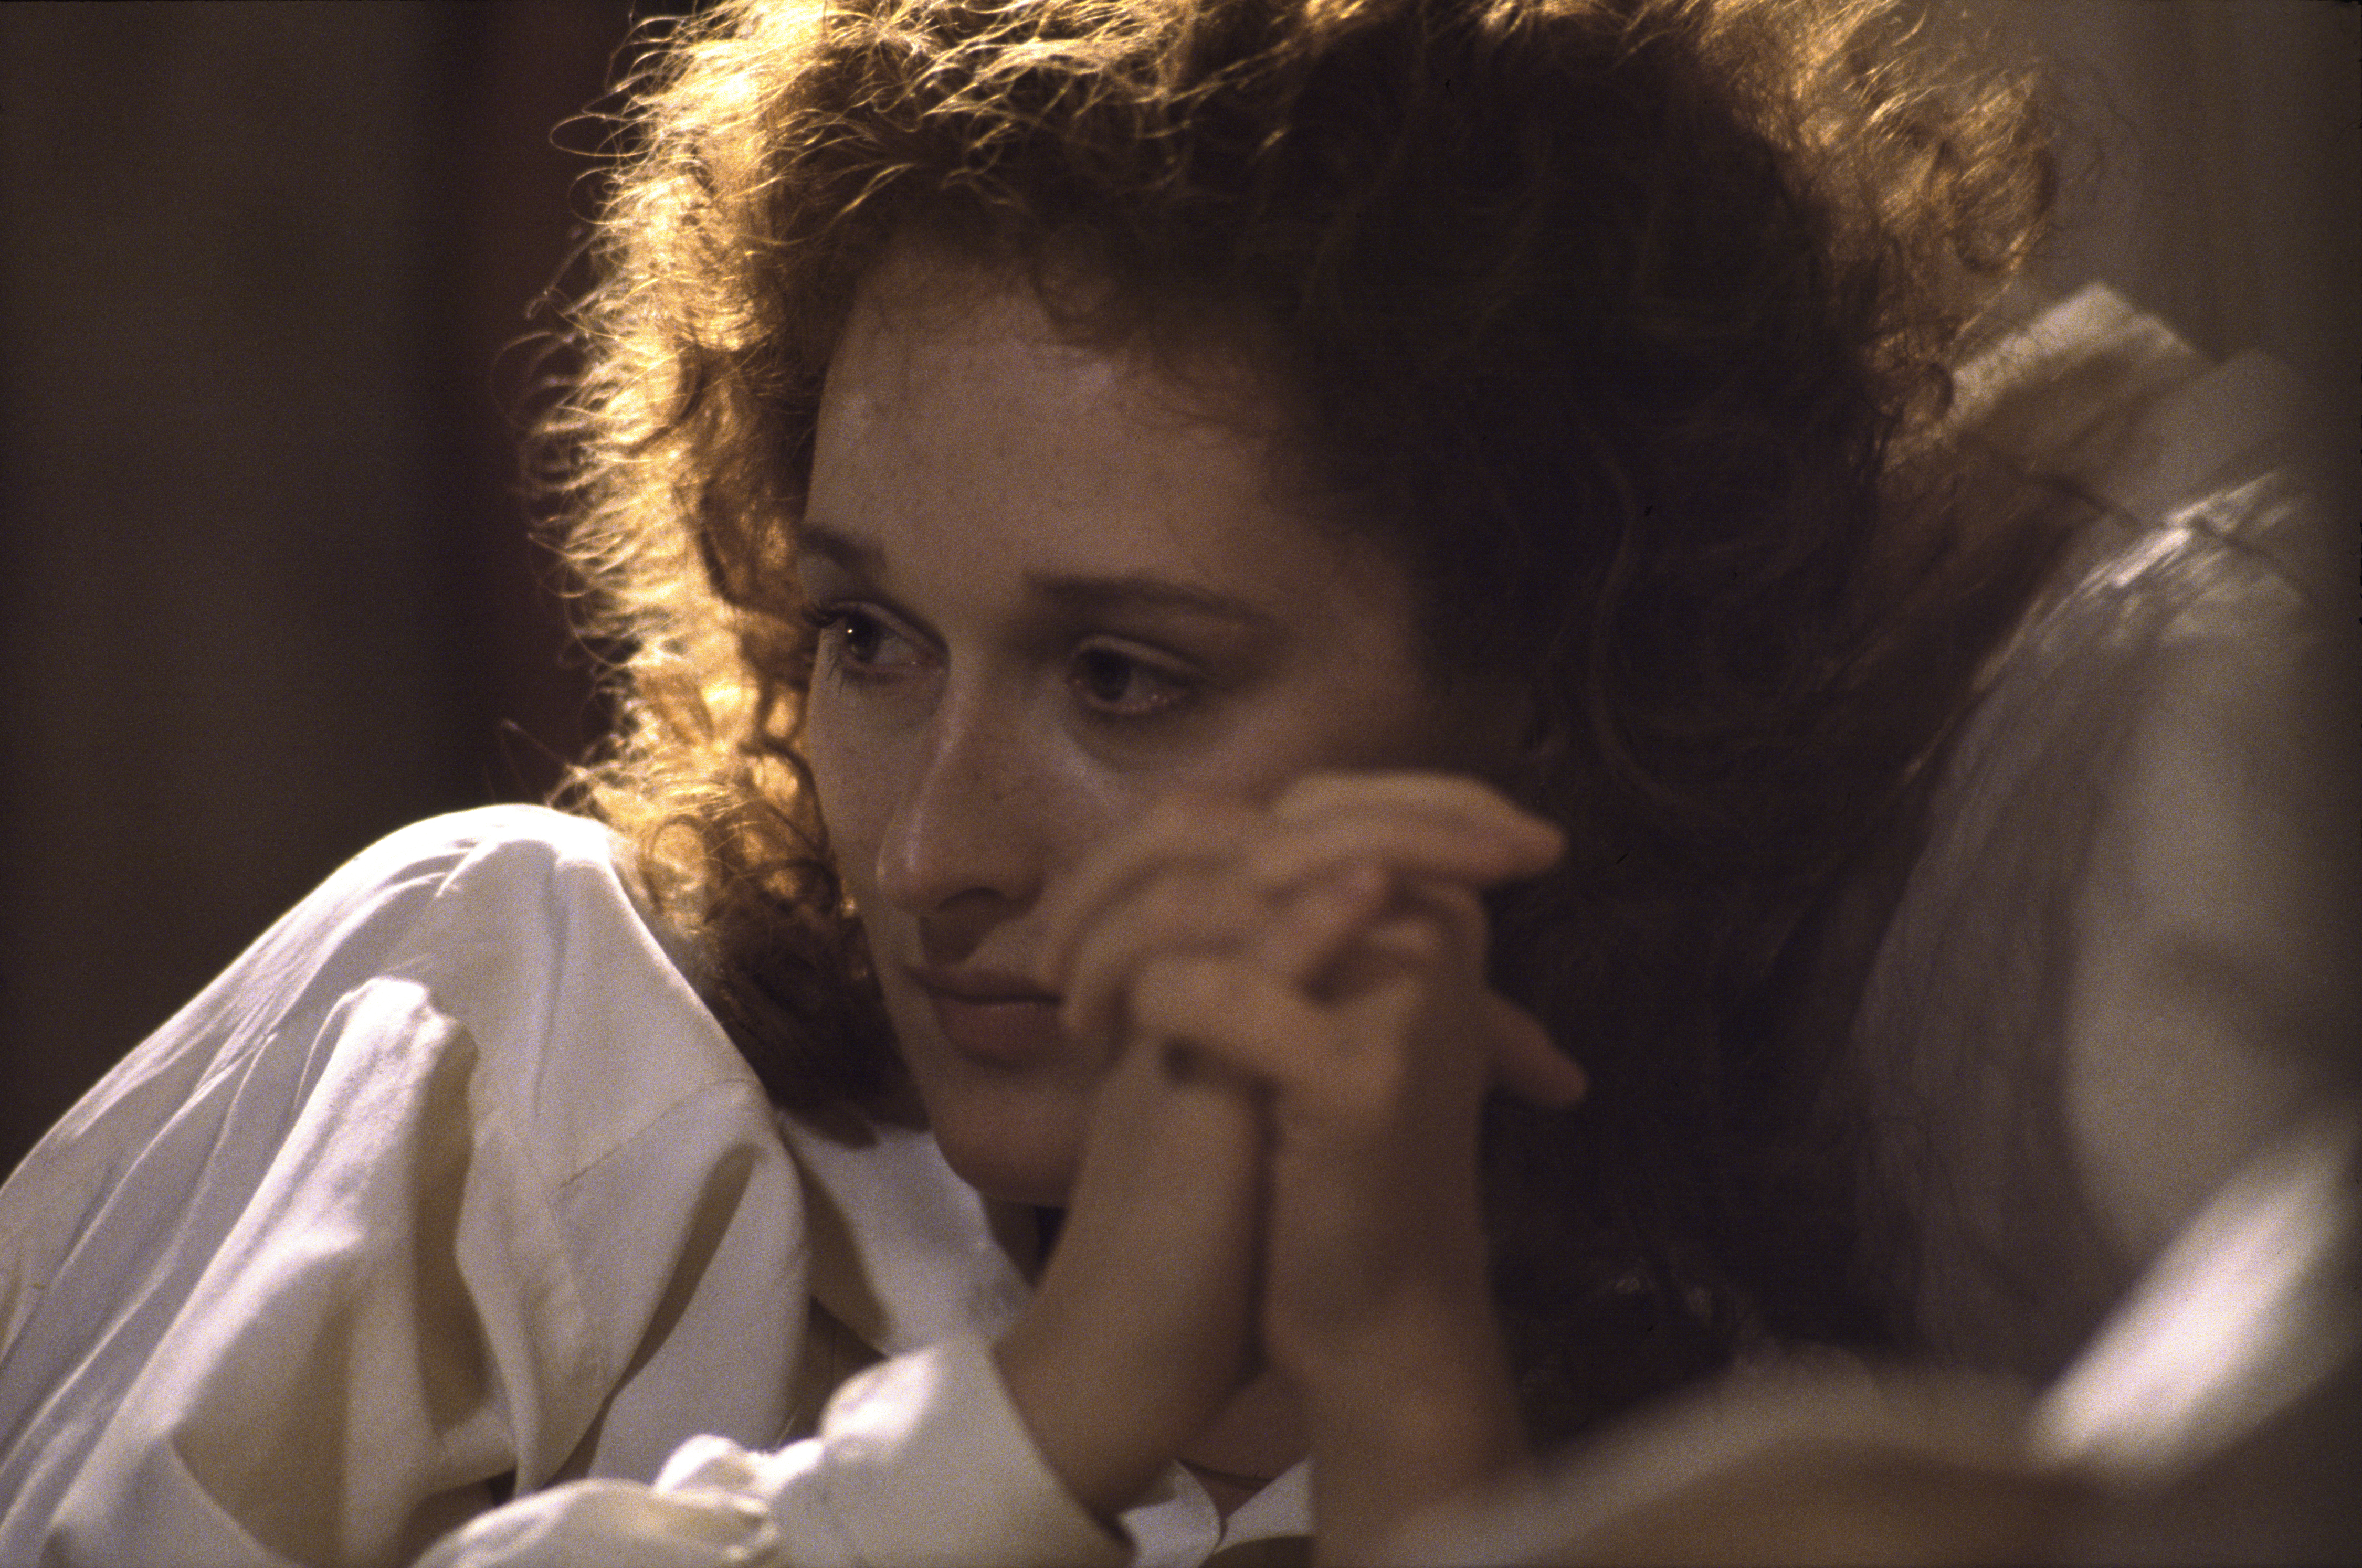 Meryl Streep in the set of the film "The French Lieutenant's Woman," 1980. | Source: Getty Images